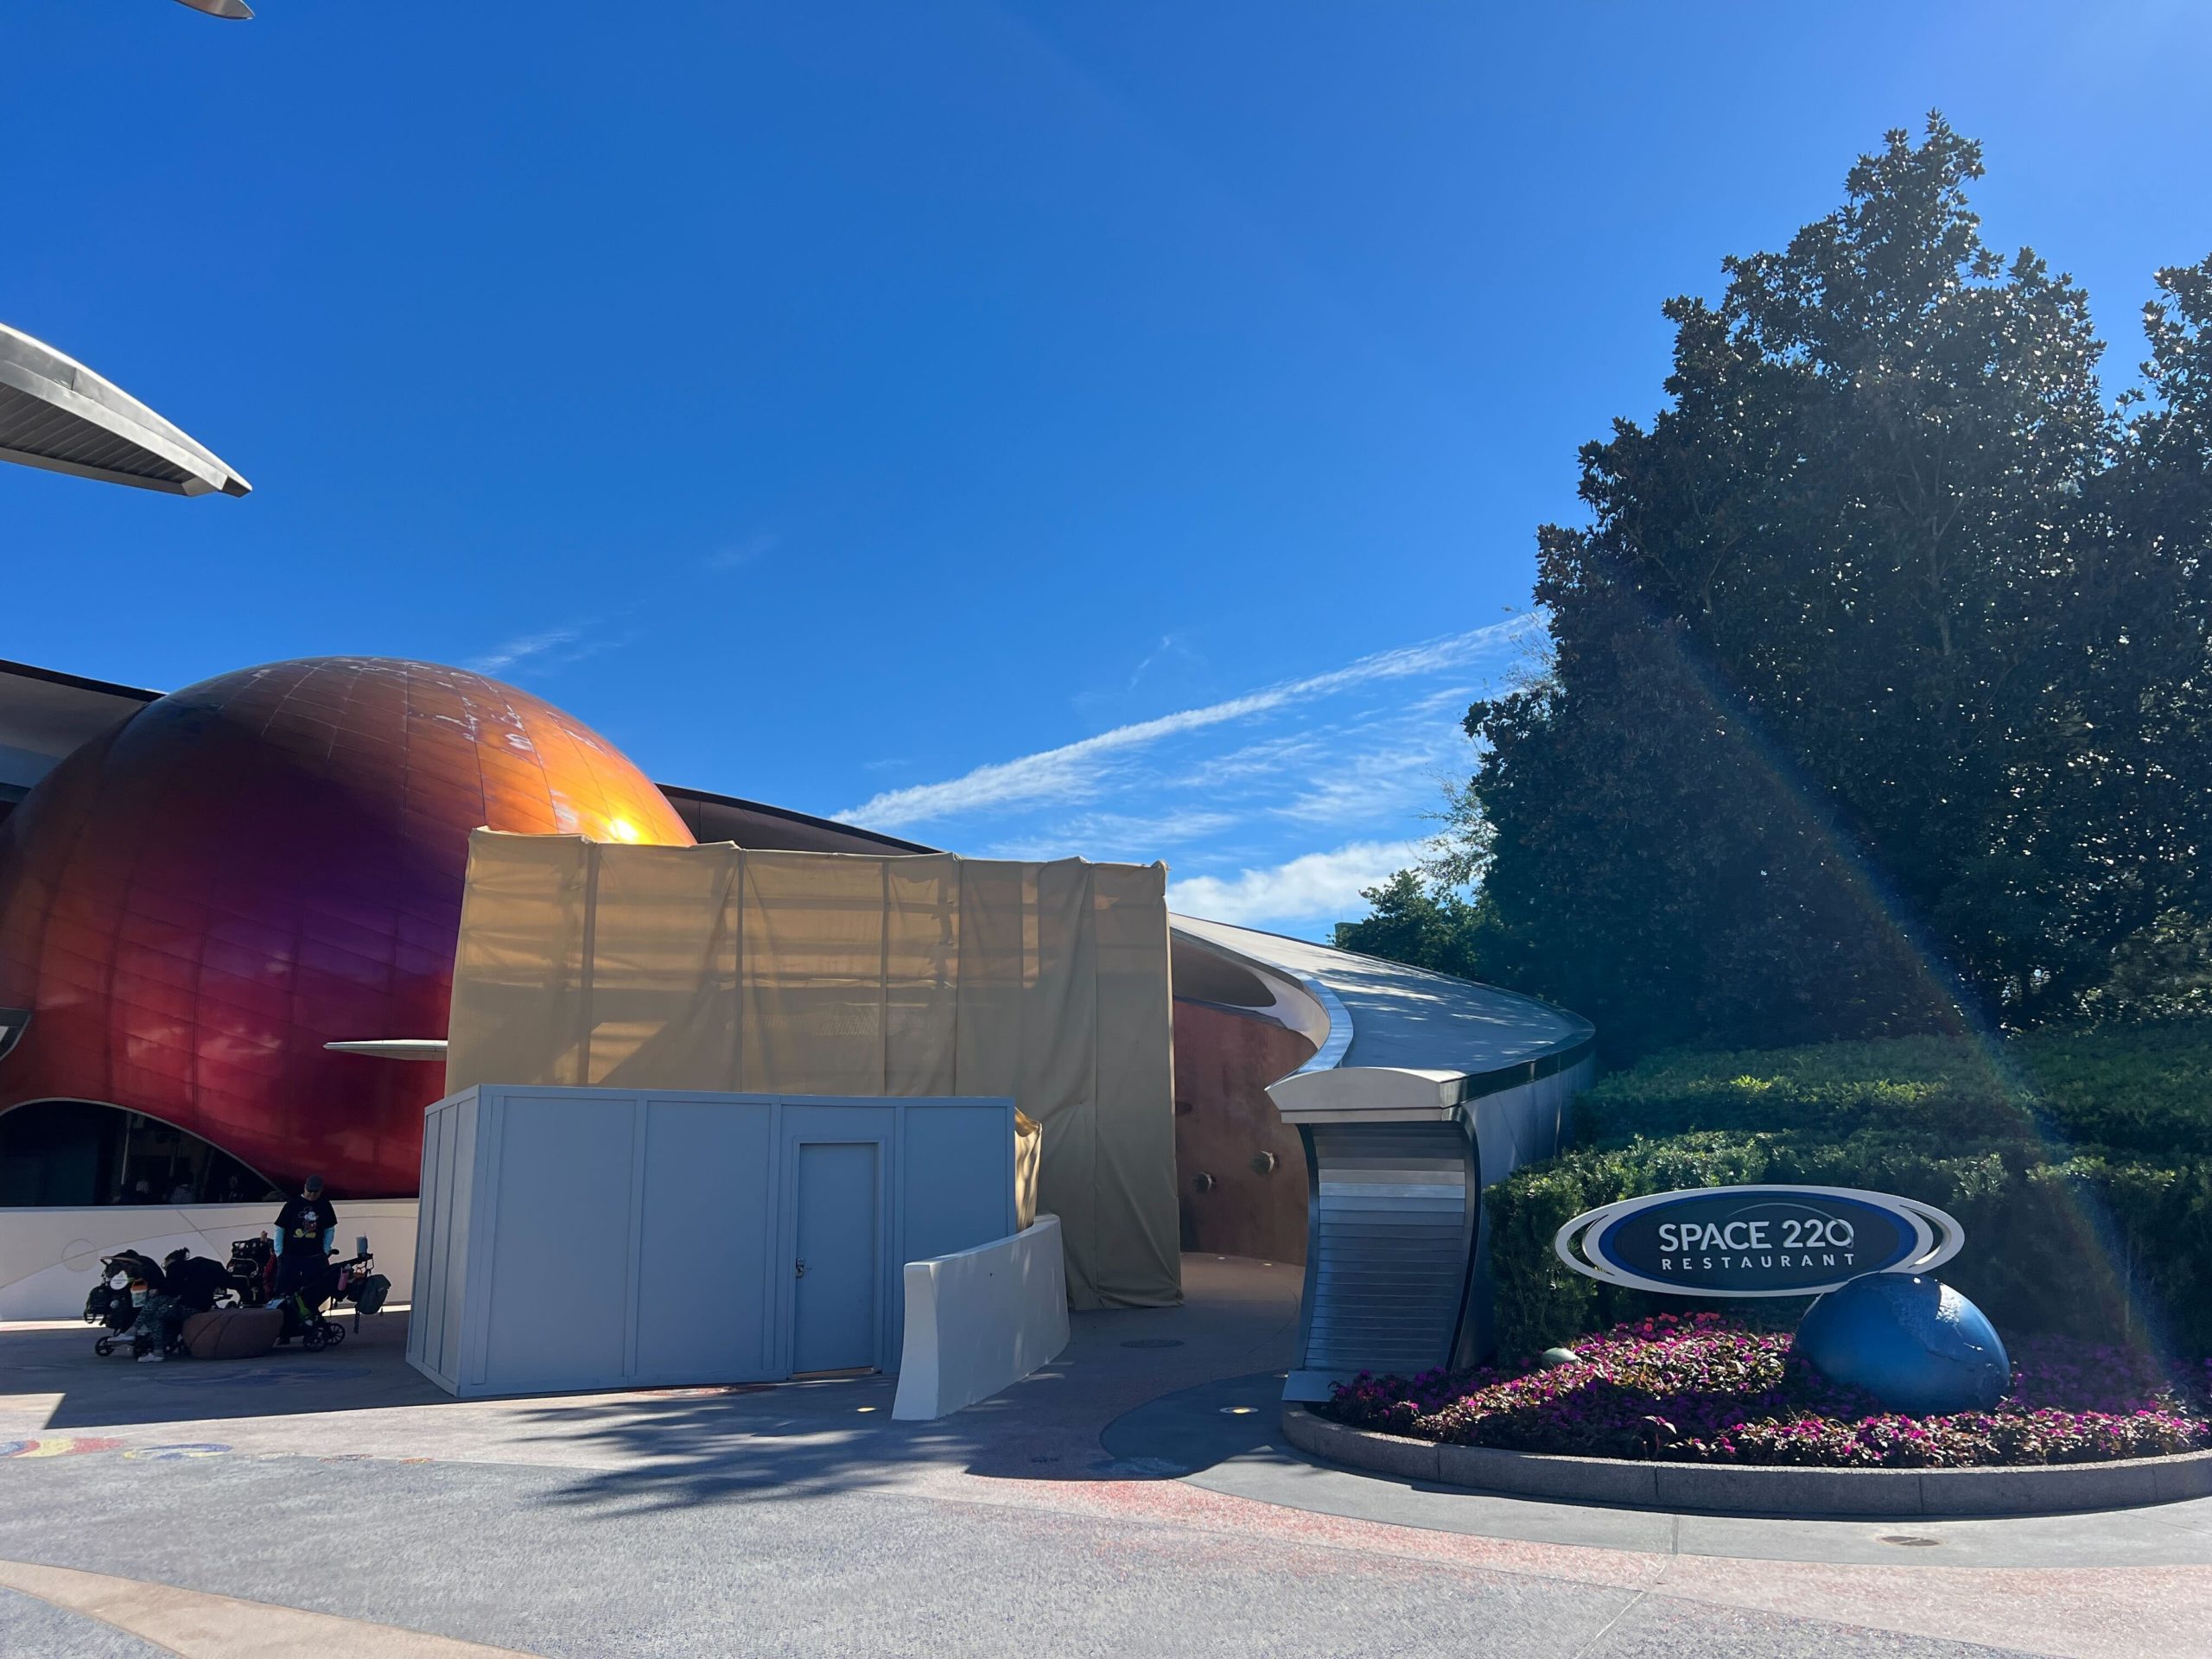 mission space sign removed